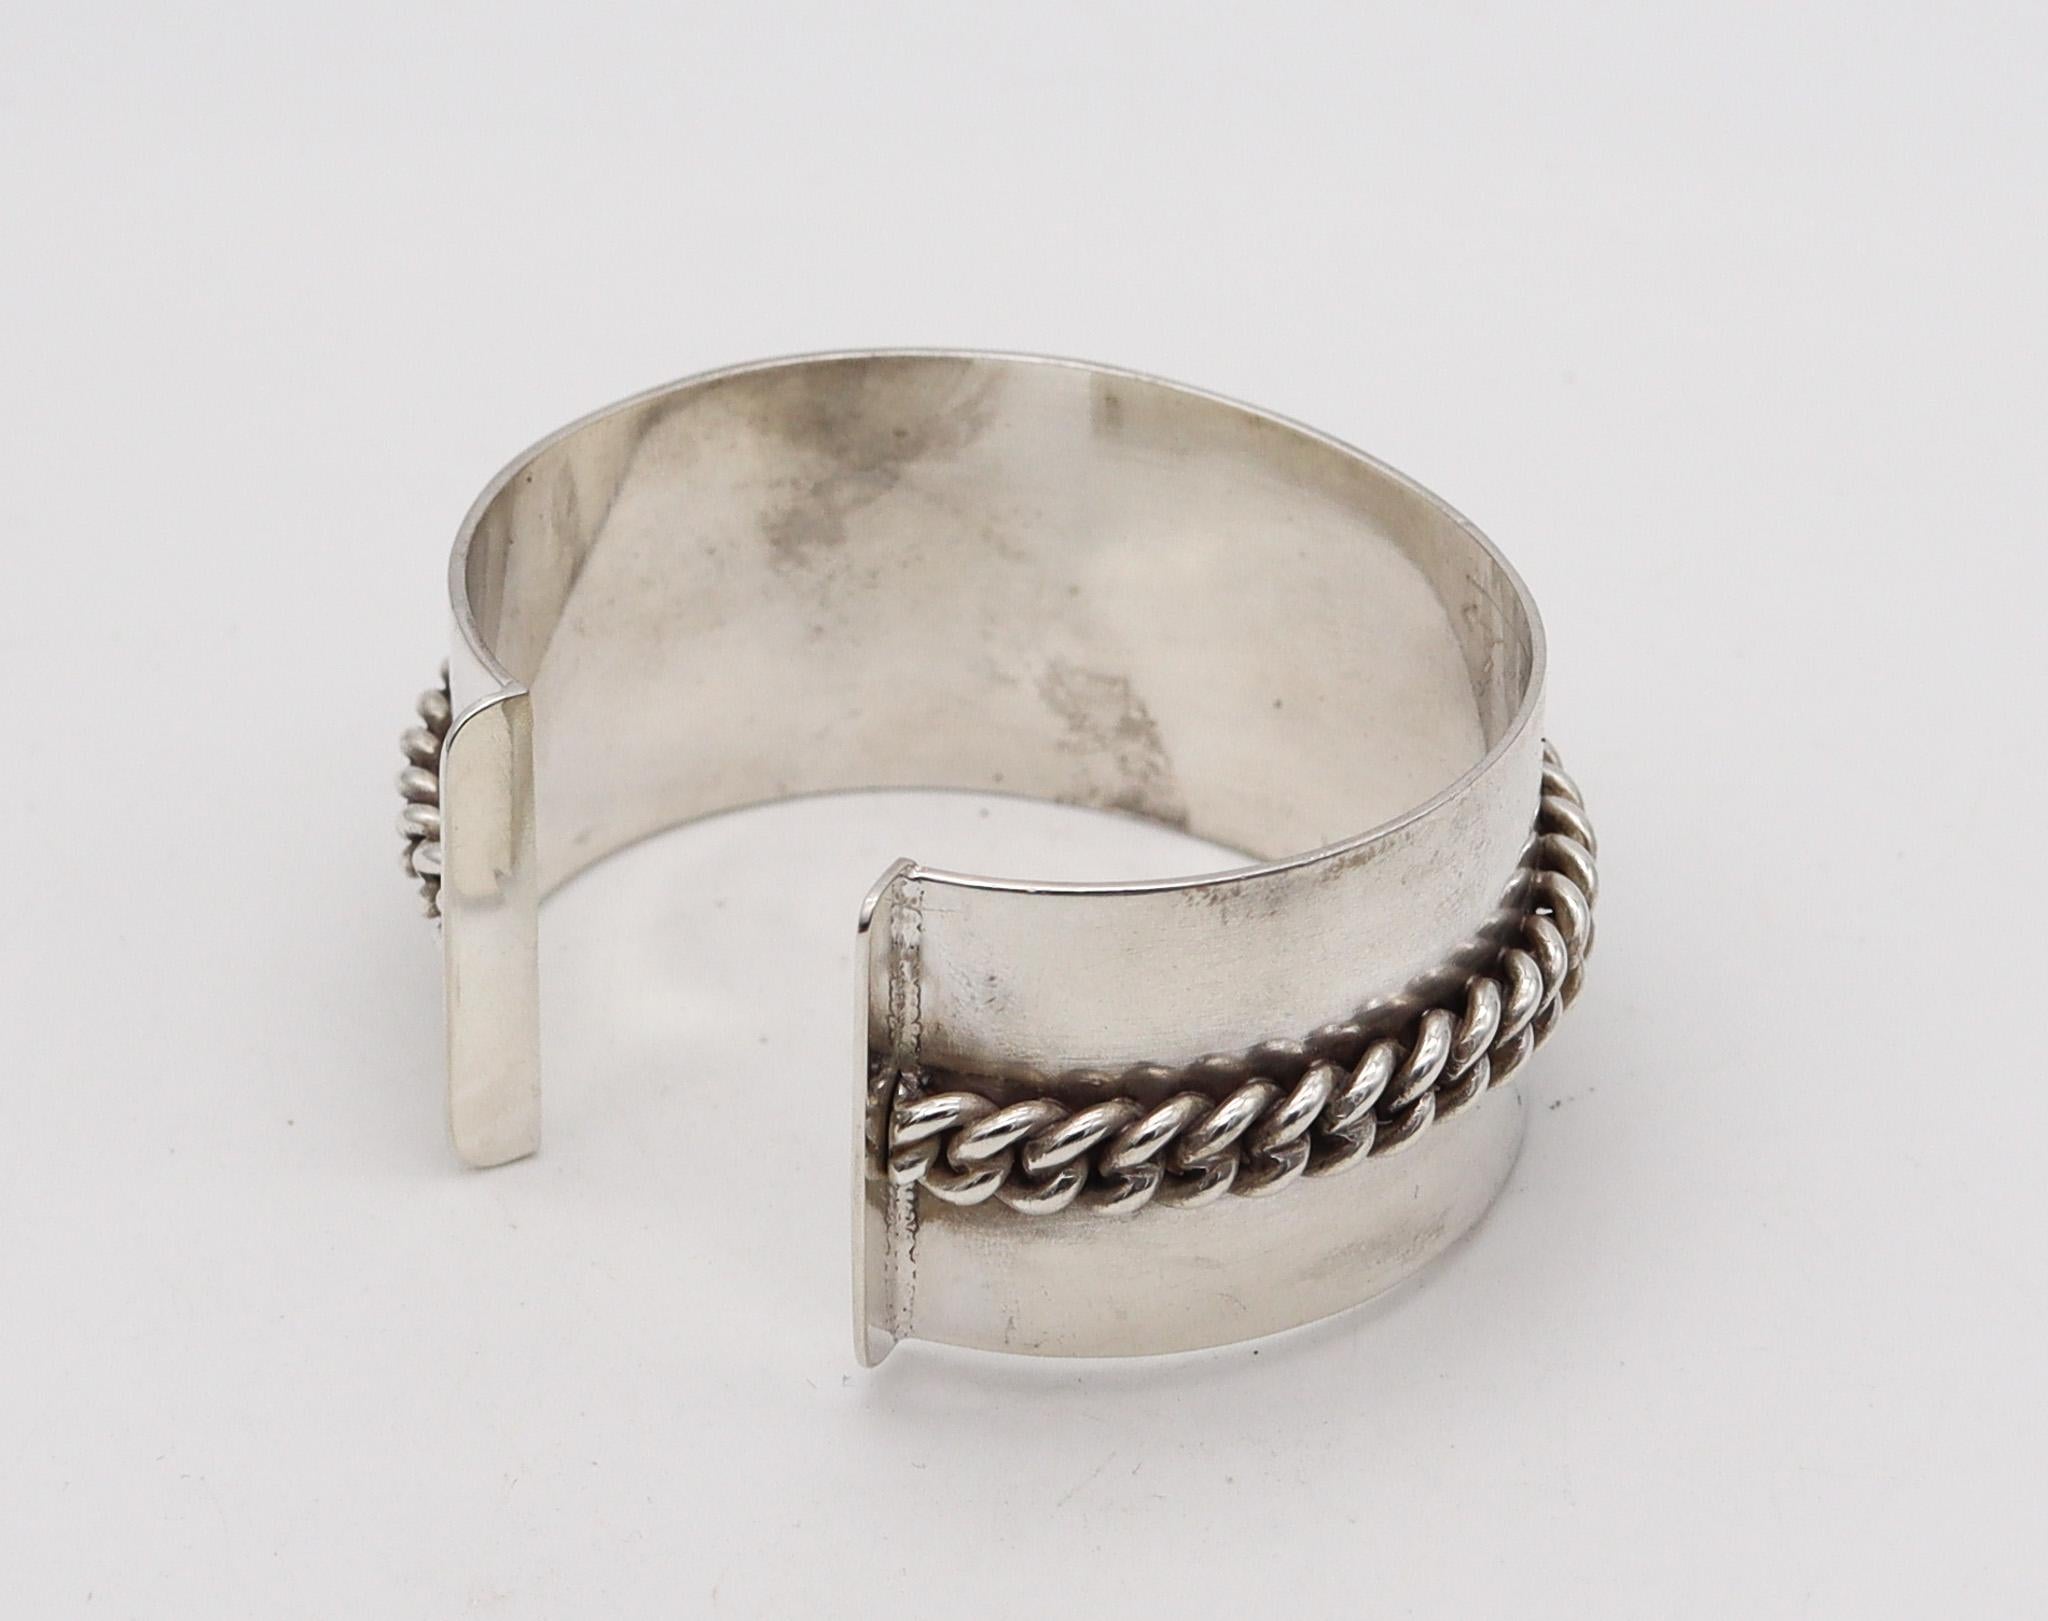 Jean Després 1960 Paris Artistic Cuff Bracelet In .800 Silver With Chained Links In Excellent Condition For Sale In Miami, FL